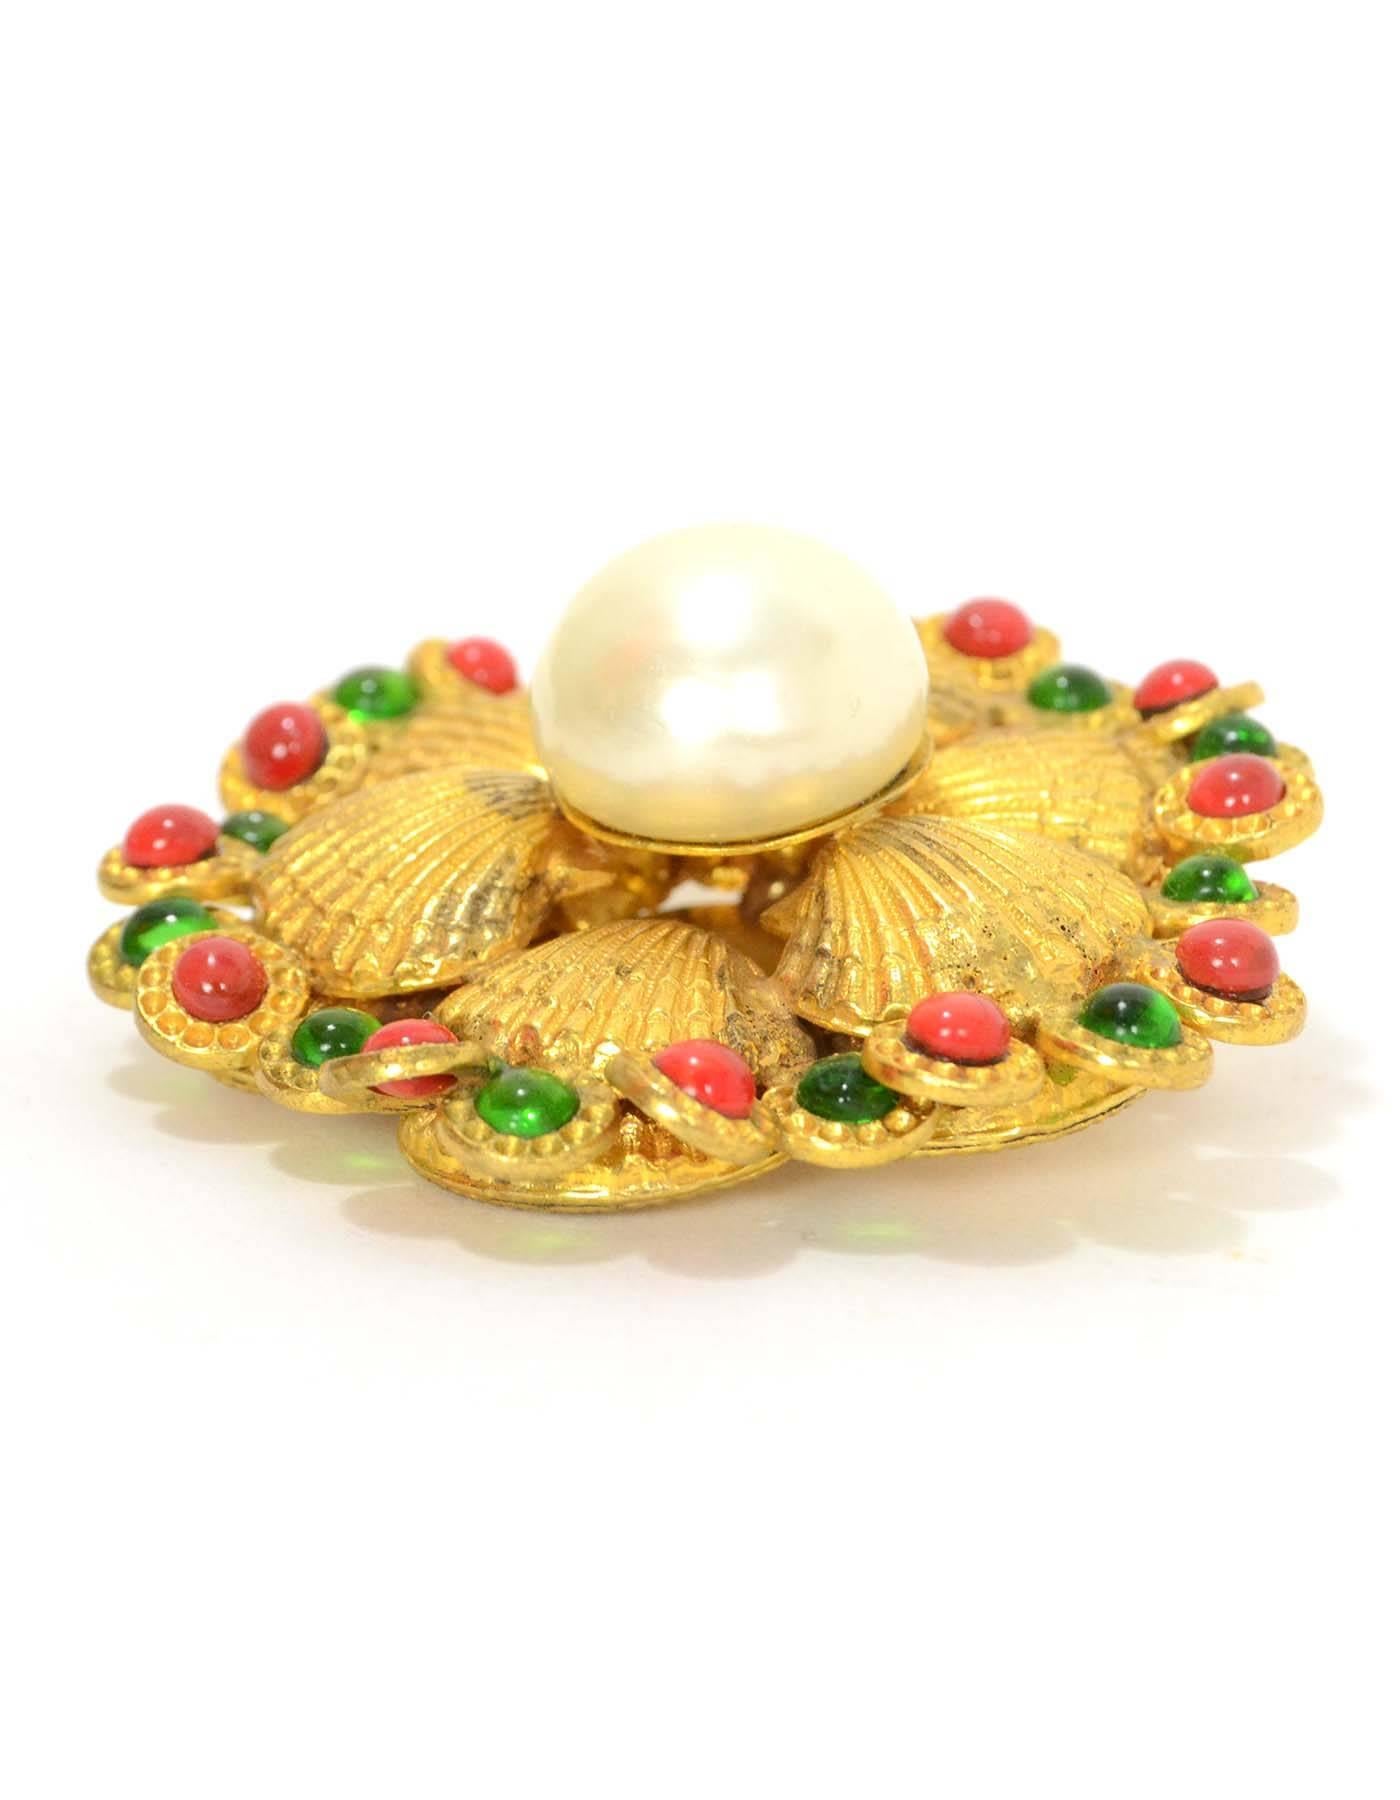 Chanel Gripoix & Pearl Gold Seashell Brooch 
Features small red and green gripoix details at outer edges of brooch with large center faux pearl
Made In: France
Year of Production: 1970's
Color: Goldtone, ivory, green and red
Materials: